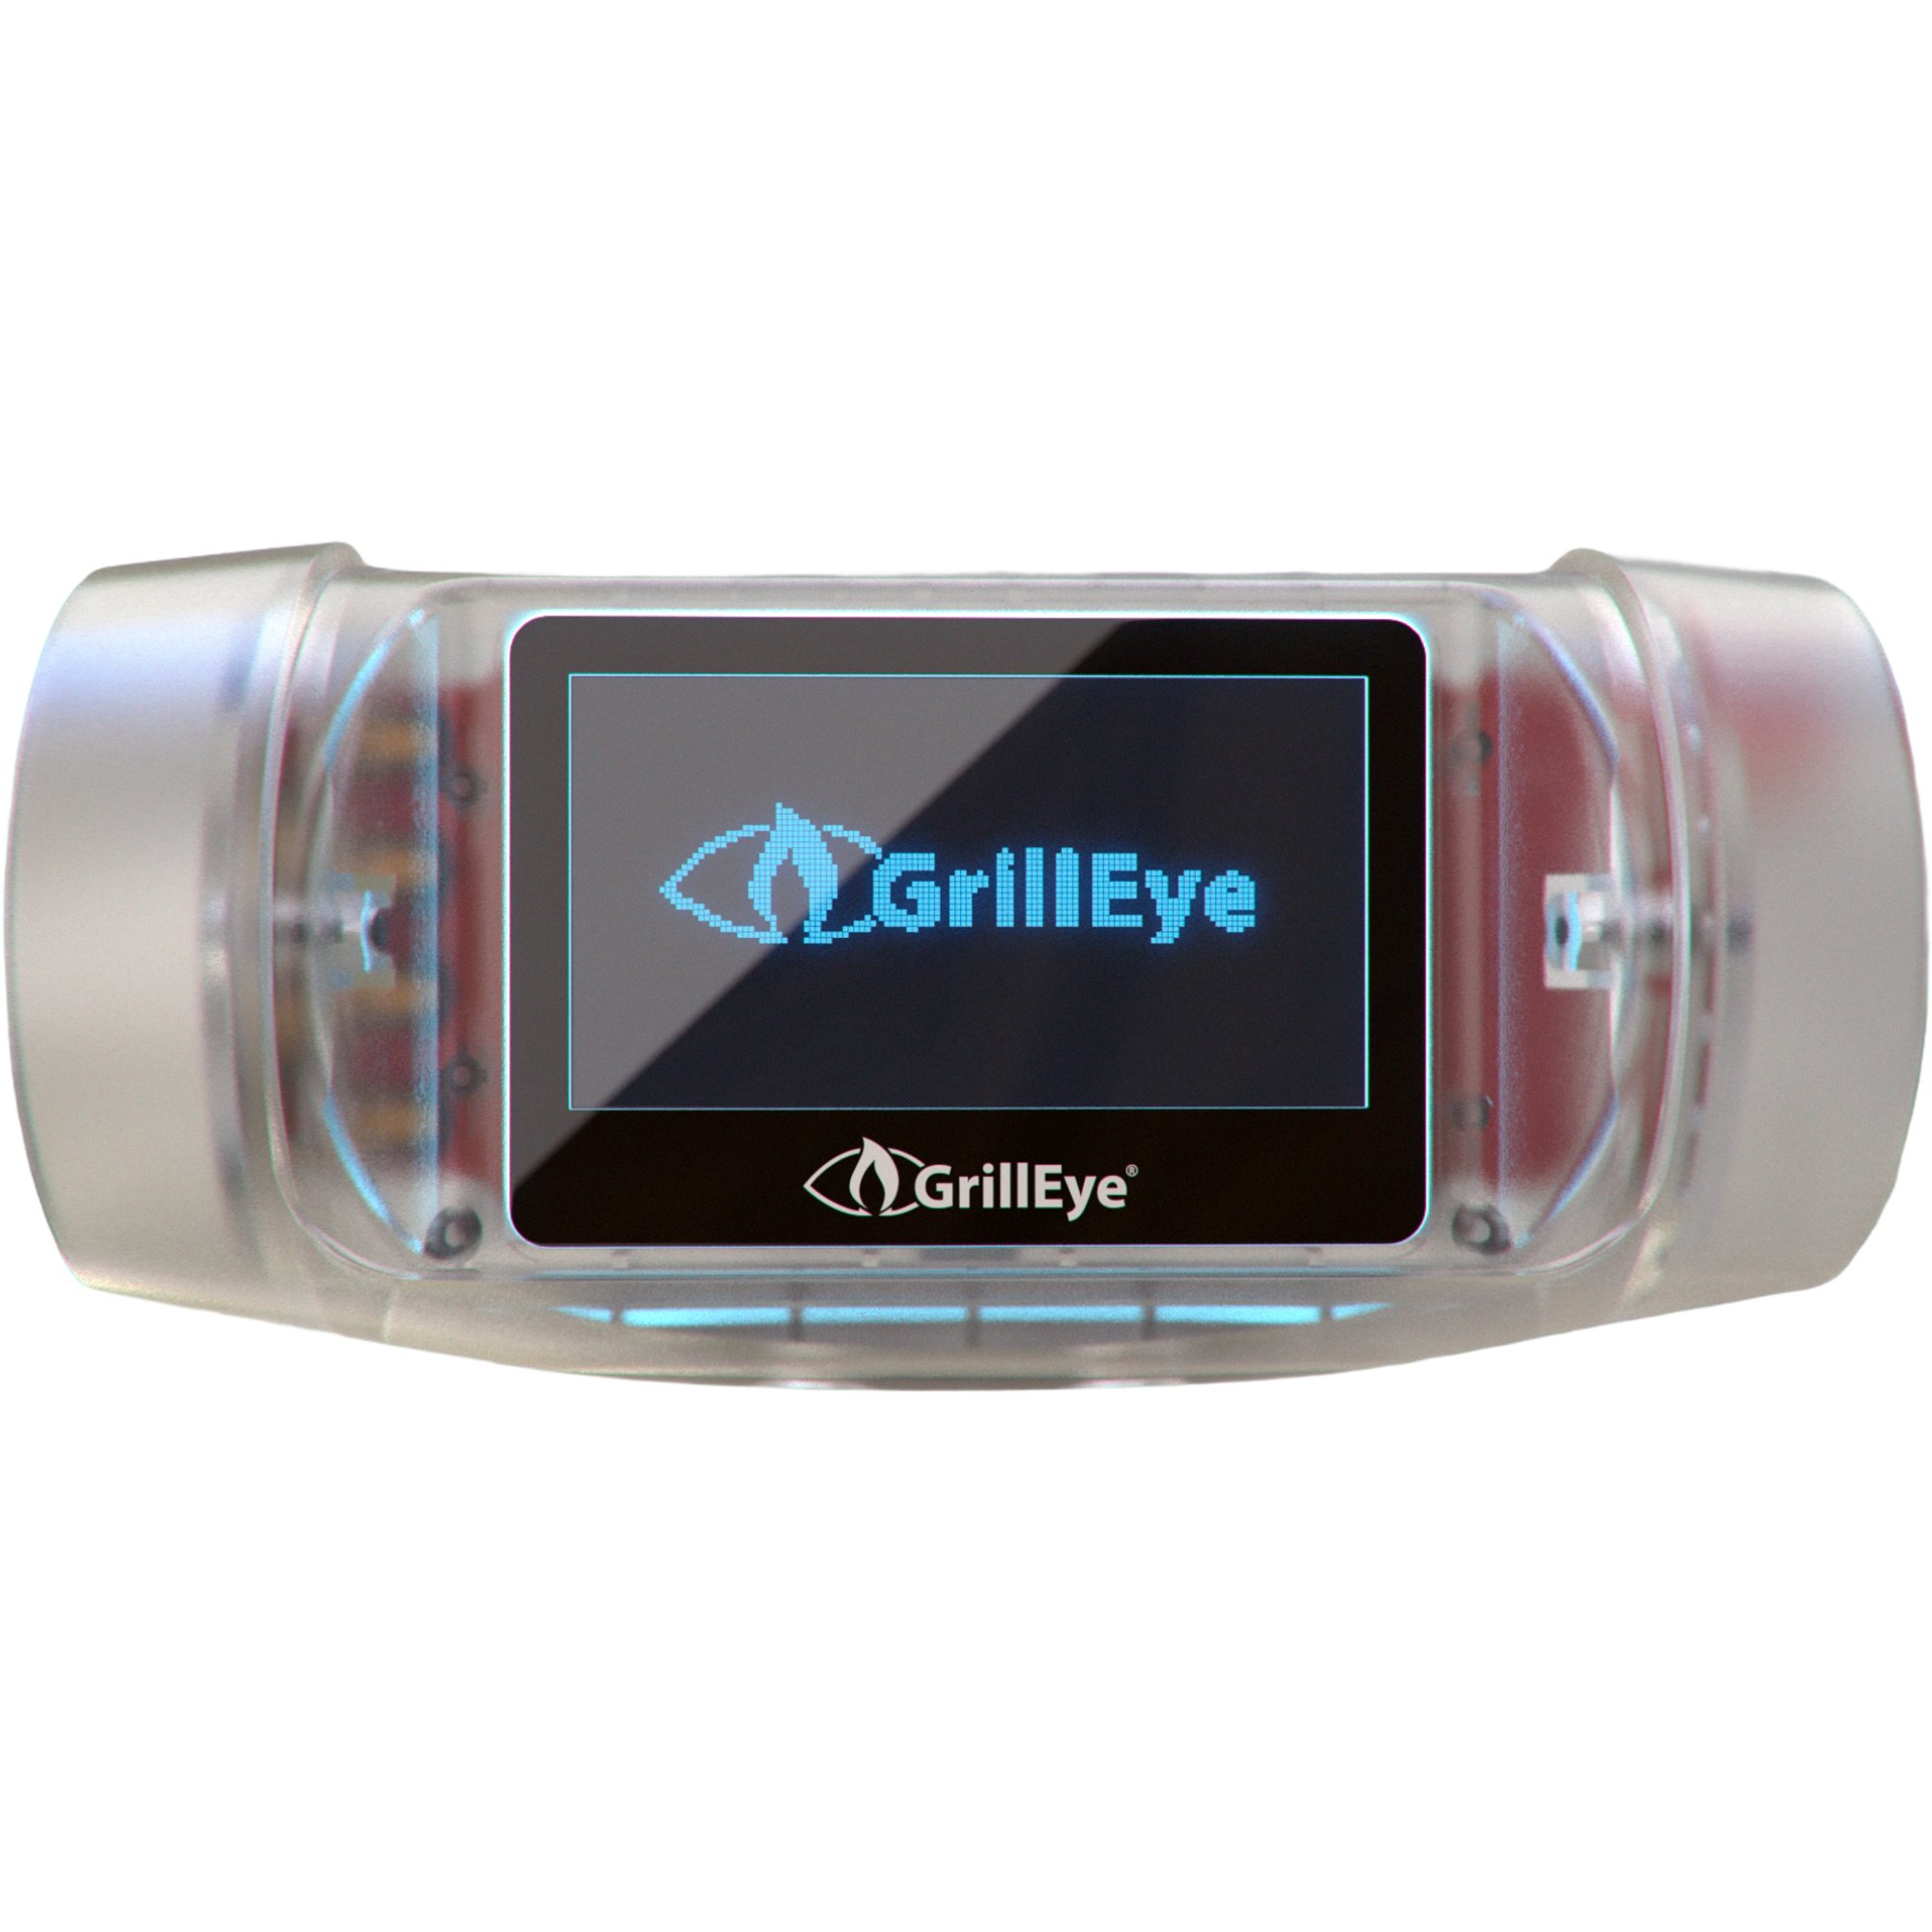 Grilleye Max termometer